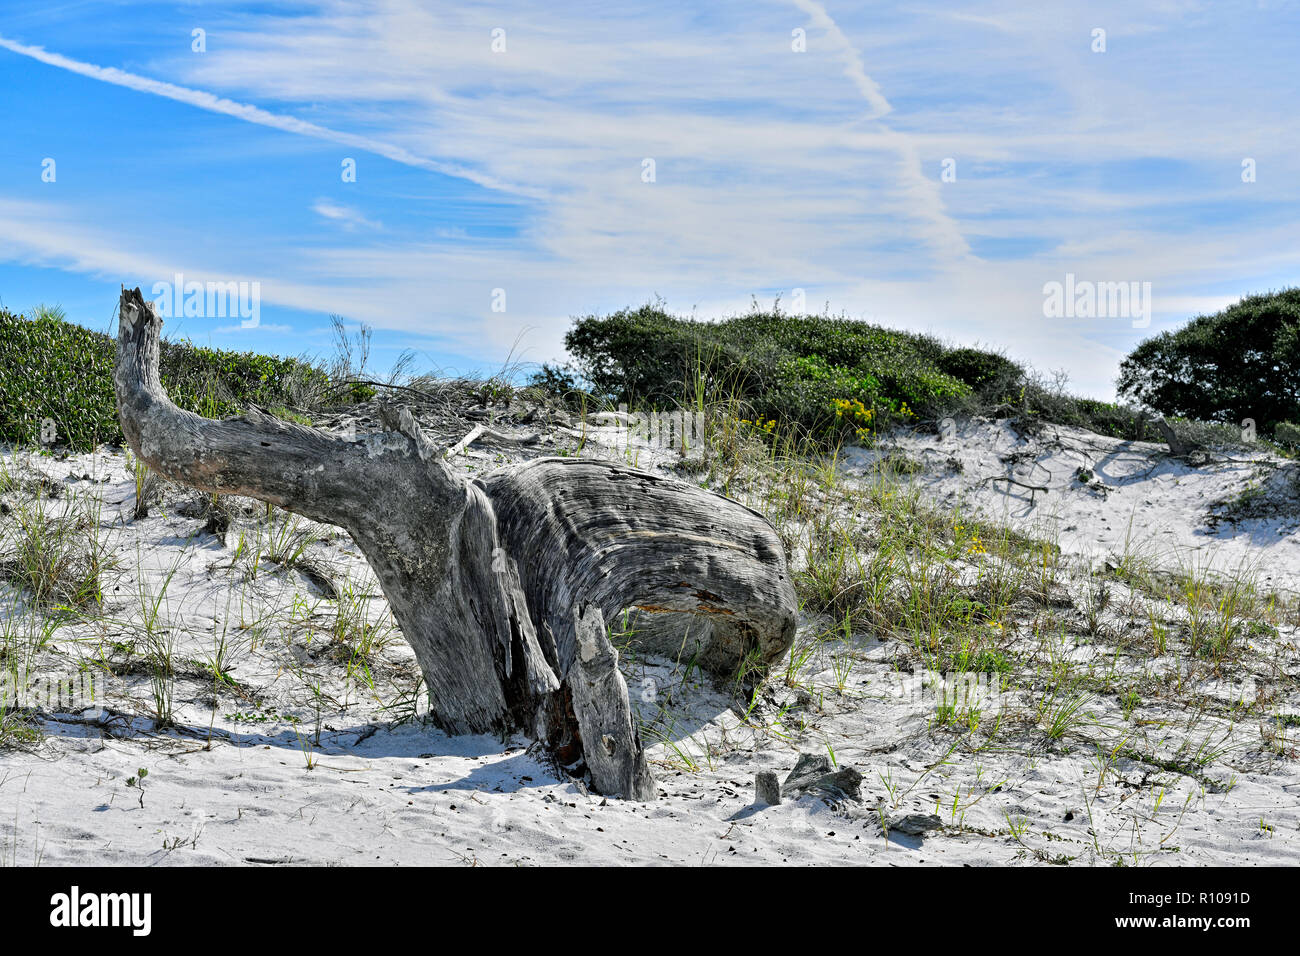 Giant weathered tree stump and trunk of a dead sand oak tree in the sand dunes along the panhandle Florida Gulf coast, USA. Stock Photo